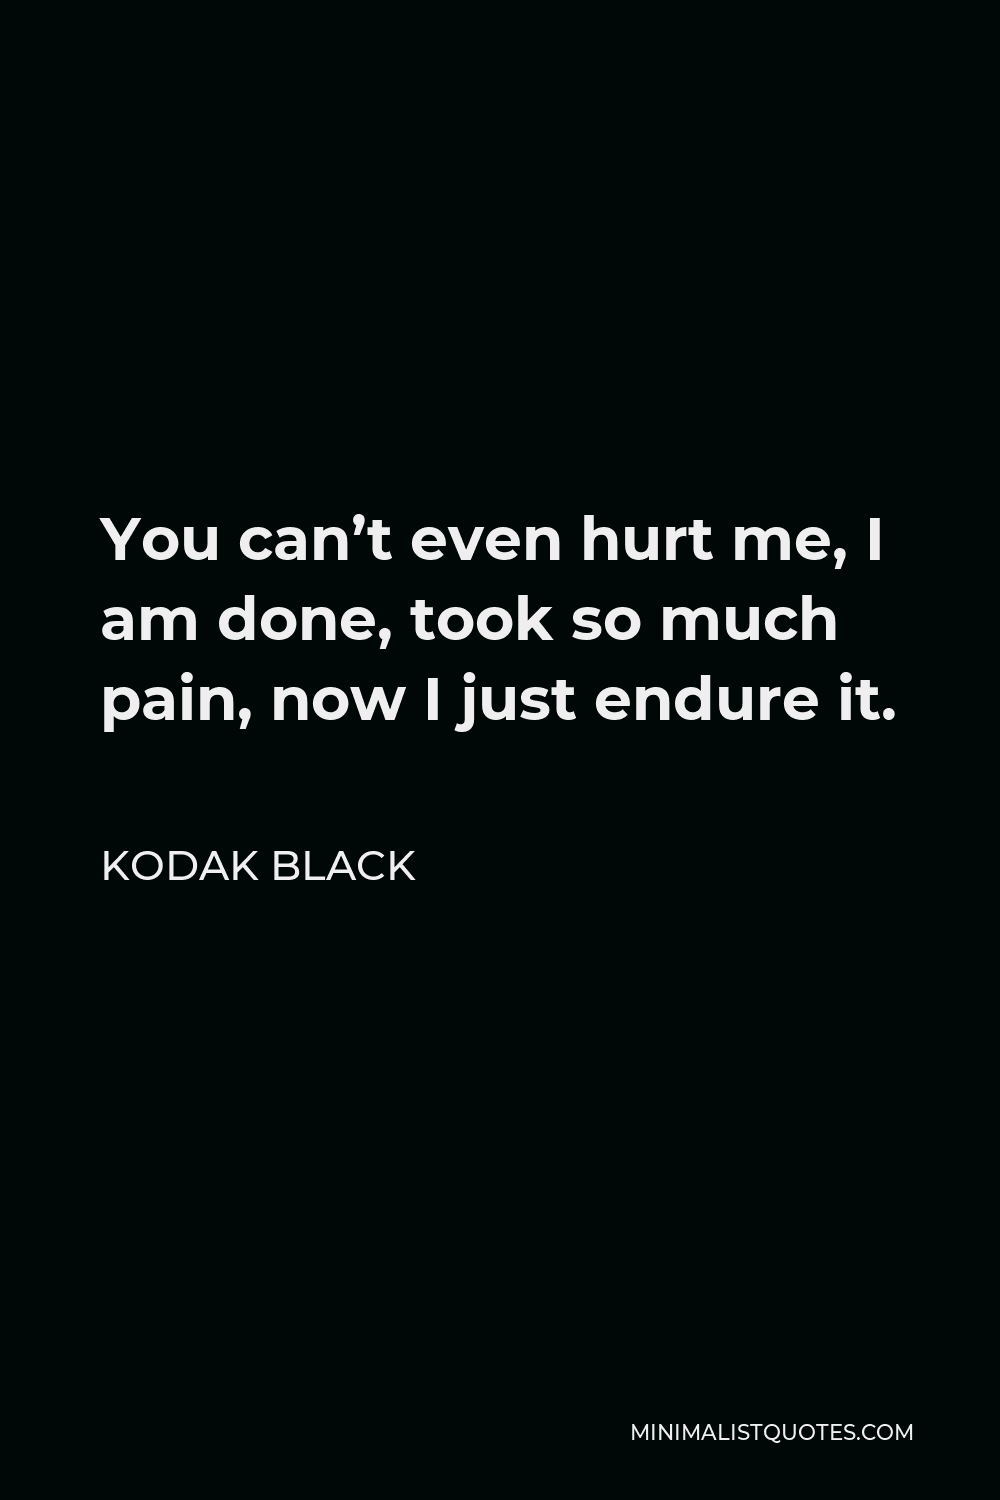 Kodak Black Quote - You can’t even hurt me, I am done, took so much pain, now I just endure it.